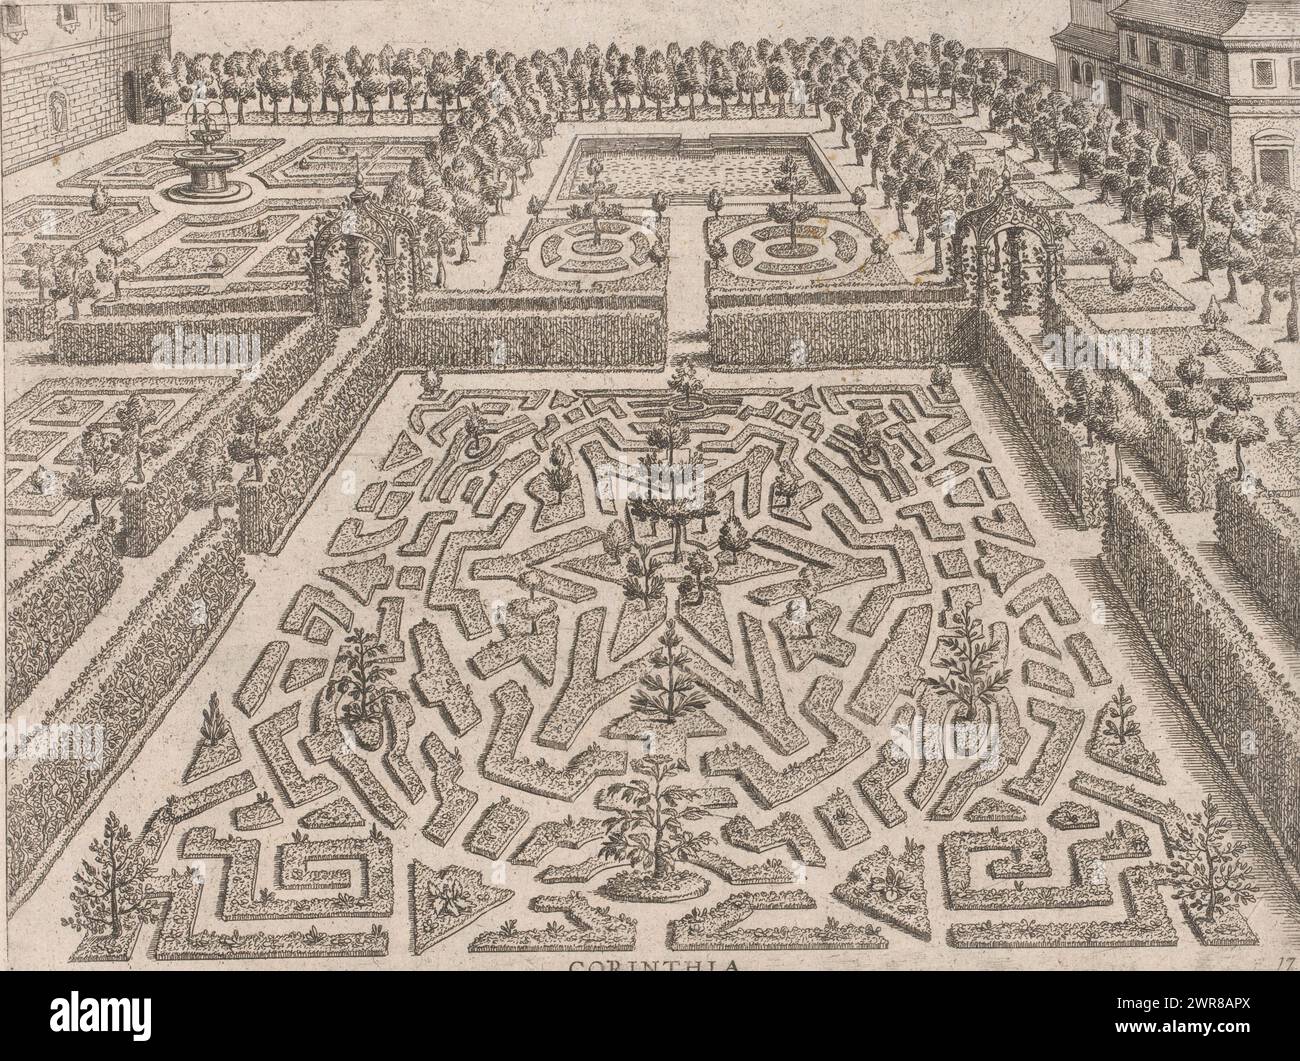 Garden with a parterre with a star-shaped compartment in the center, Corinthia (title on object), Hortorum Viridariorumque elegants et multiplicis formae (series title), Garden designs associated with the Doric, Ionic and Corinthian building orders (series title), Garden with a parterre with in the center a star-shaped compartment. The garden is laid out according to the Corinthian building order., print maker: anonymous, after design by: Hans Vredeman de Vries, publisher: Philips Galle, Antwerp, 1583, paper, etching, height 193 mm × width 249 mm Stock Photo